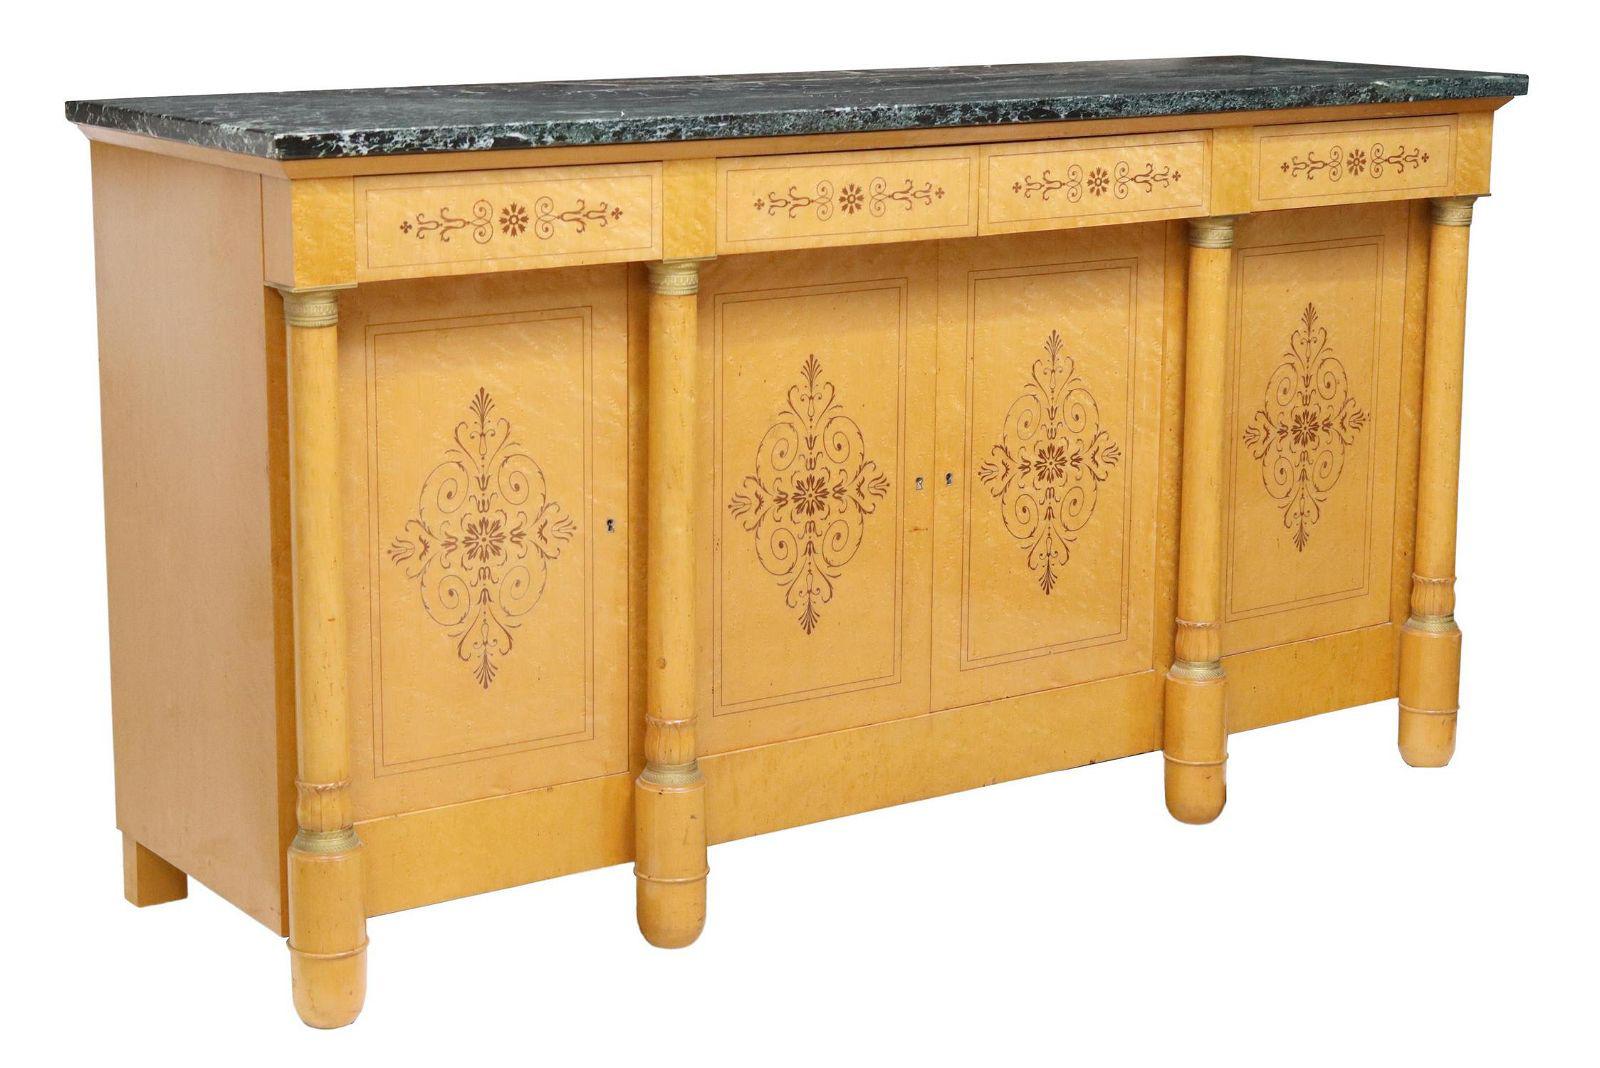 Empire Revival Vintage French Empire Style Green Marble-Top Birdseye Maple Sideboard For Sale